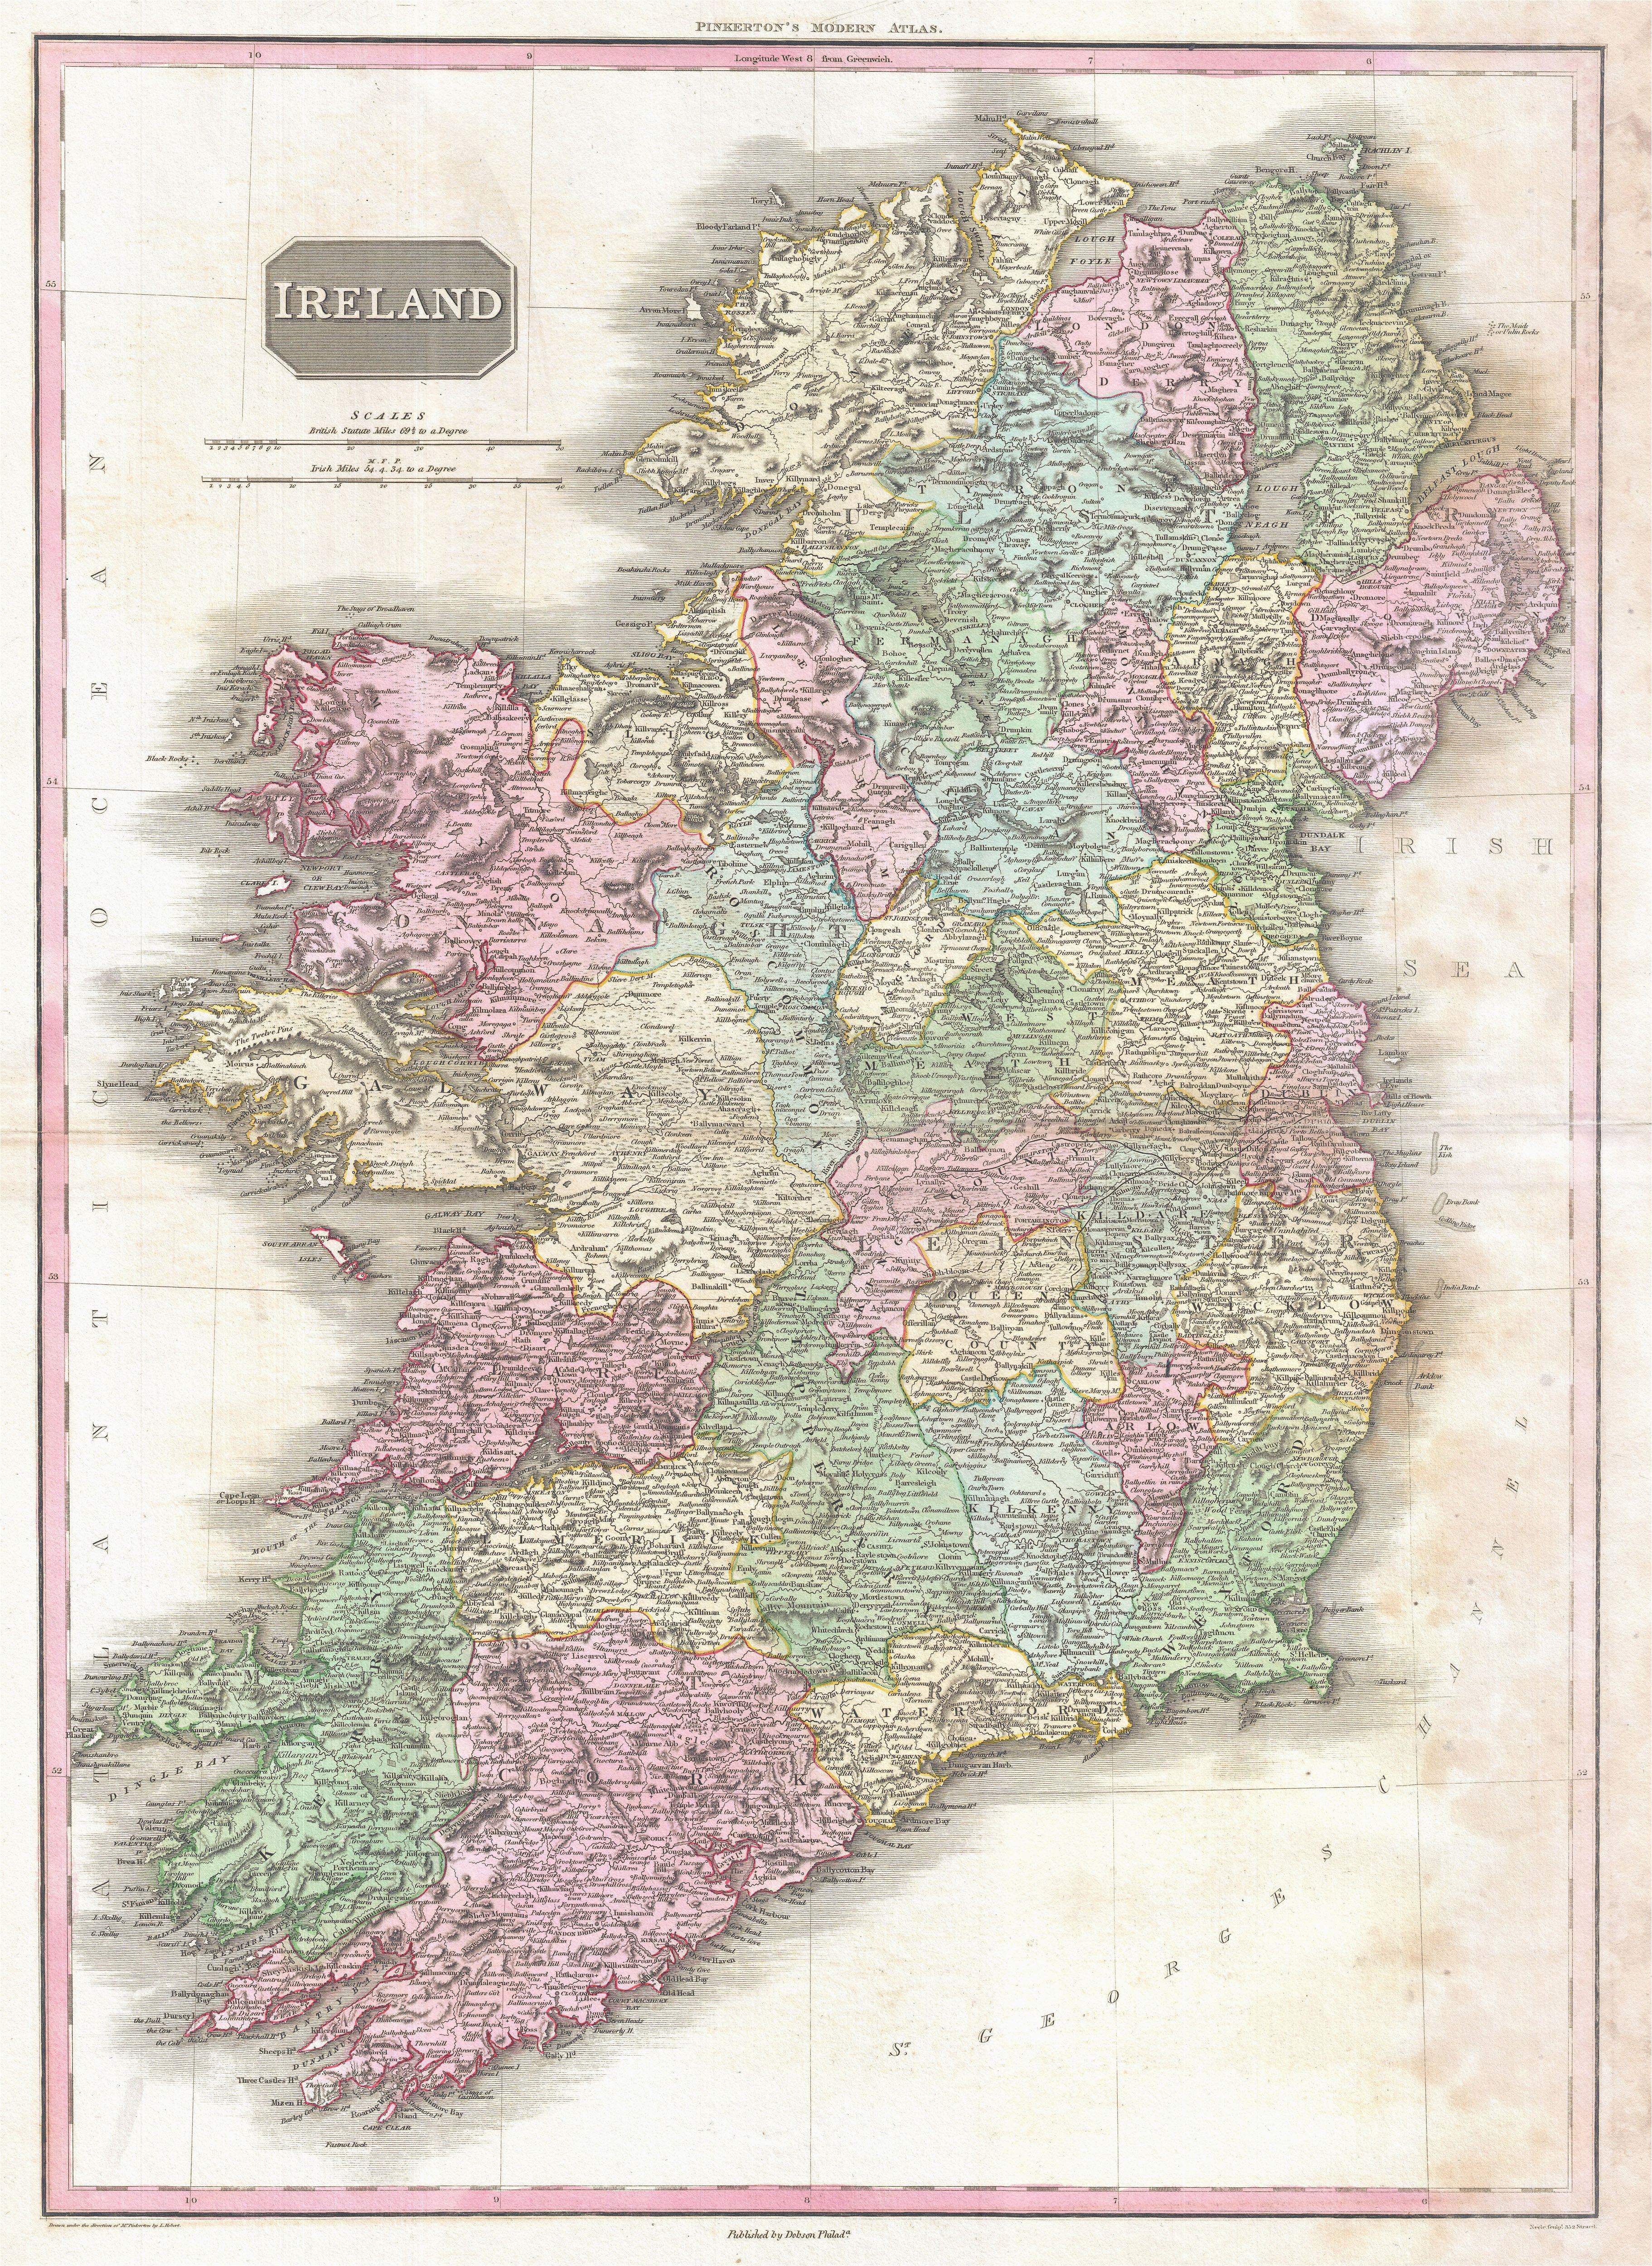 Picture Of Map Of Ireland File 1818 Pinkerton Map Of Ireland Geographicus Ireland